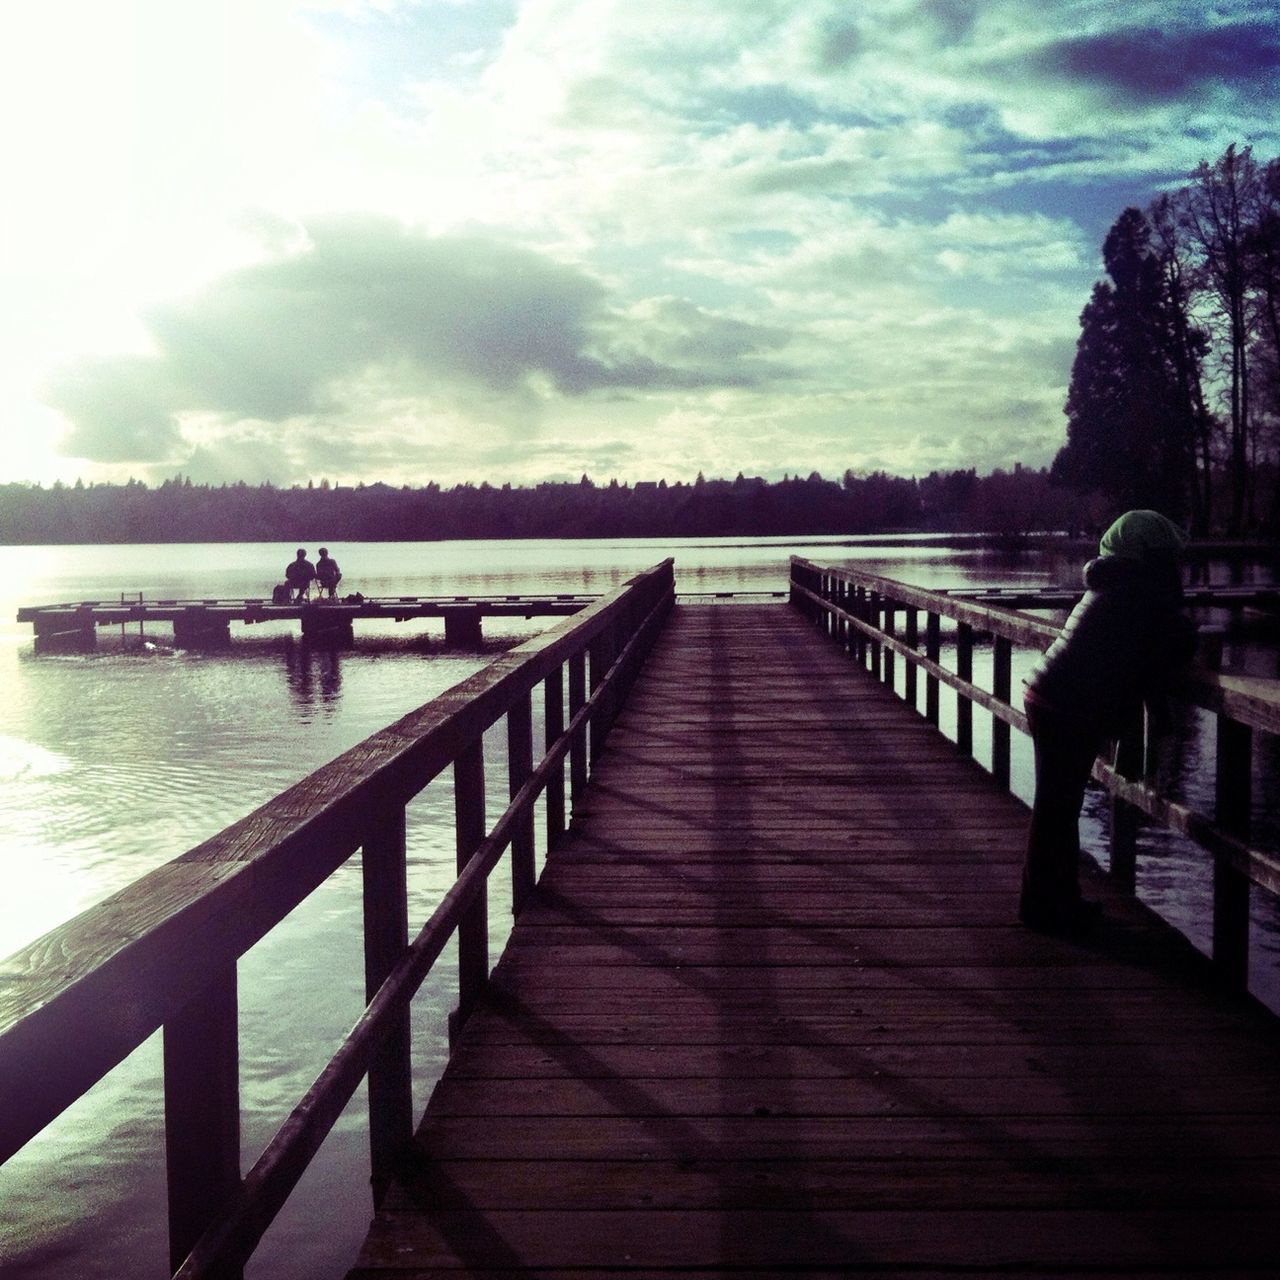 water, sky, railing, pier, silhouette, tranquil scene, tranquility, lake, cloud - sky, the way forward, scenics, nature, beauty in nature, bench, boardwalk, river, tree, cloud, men